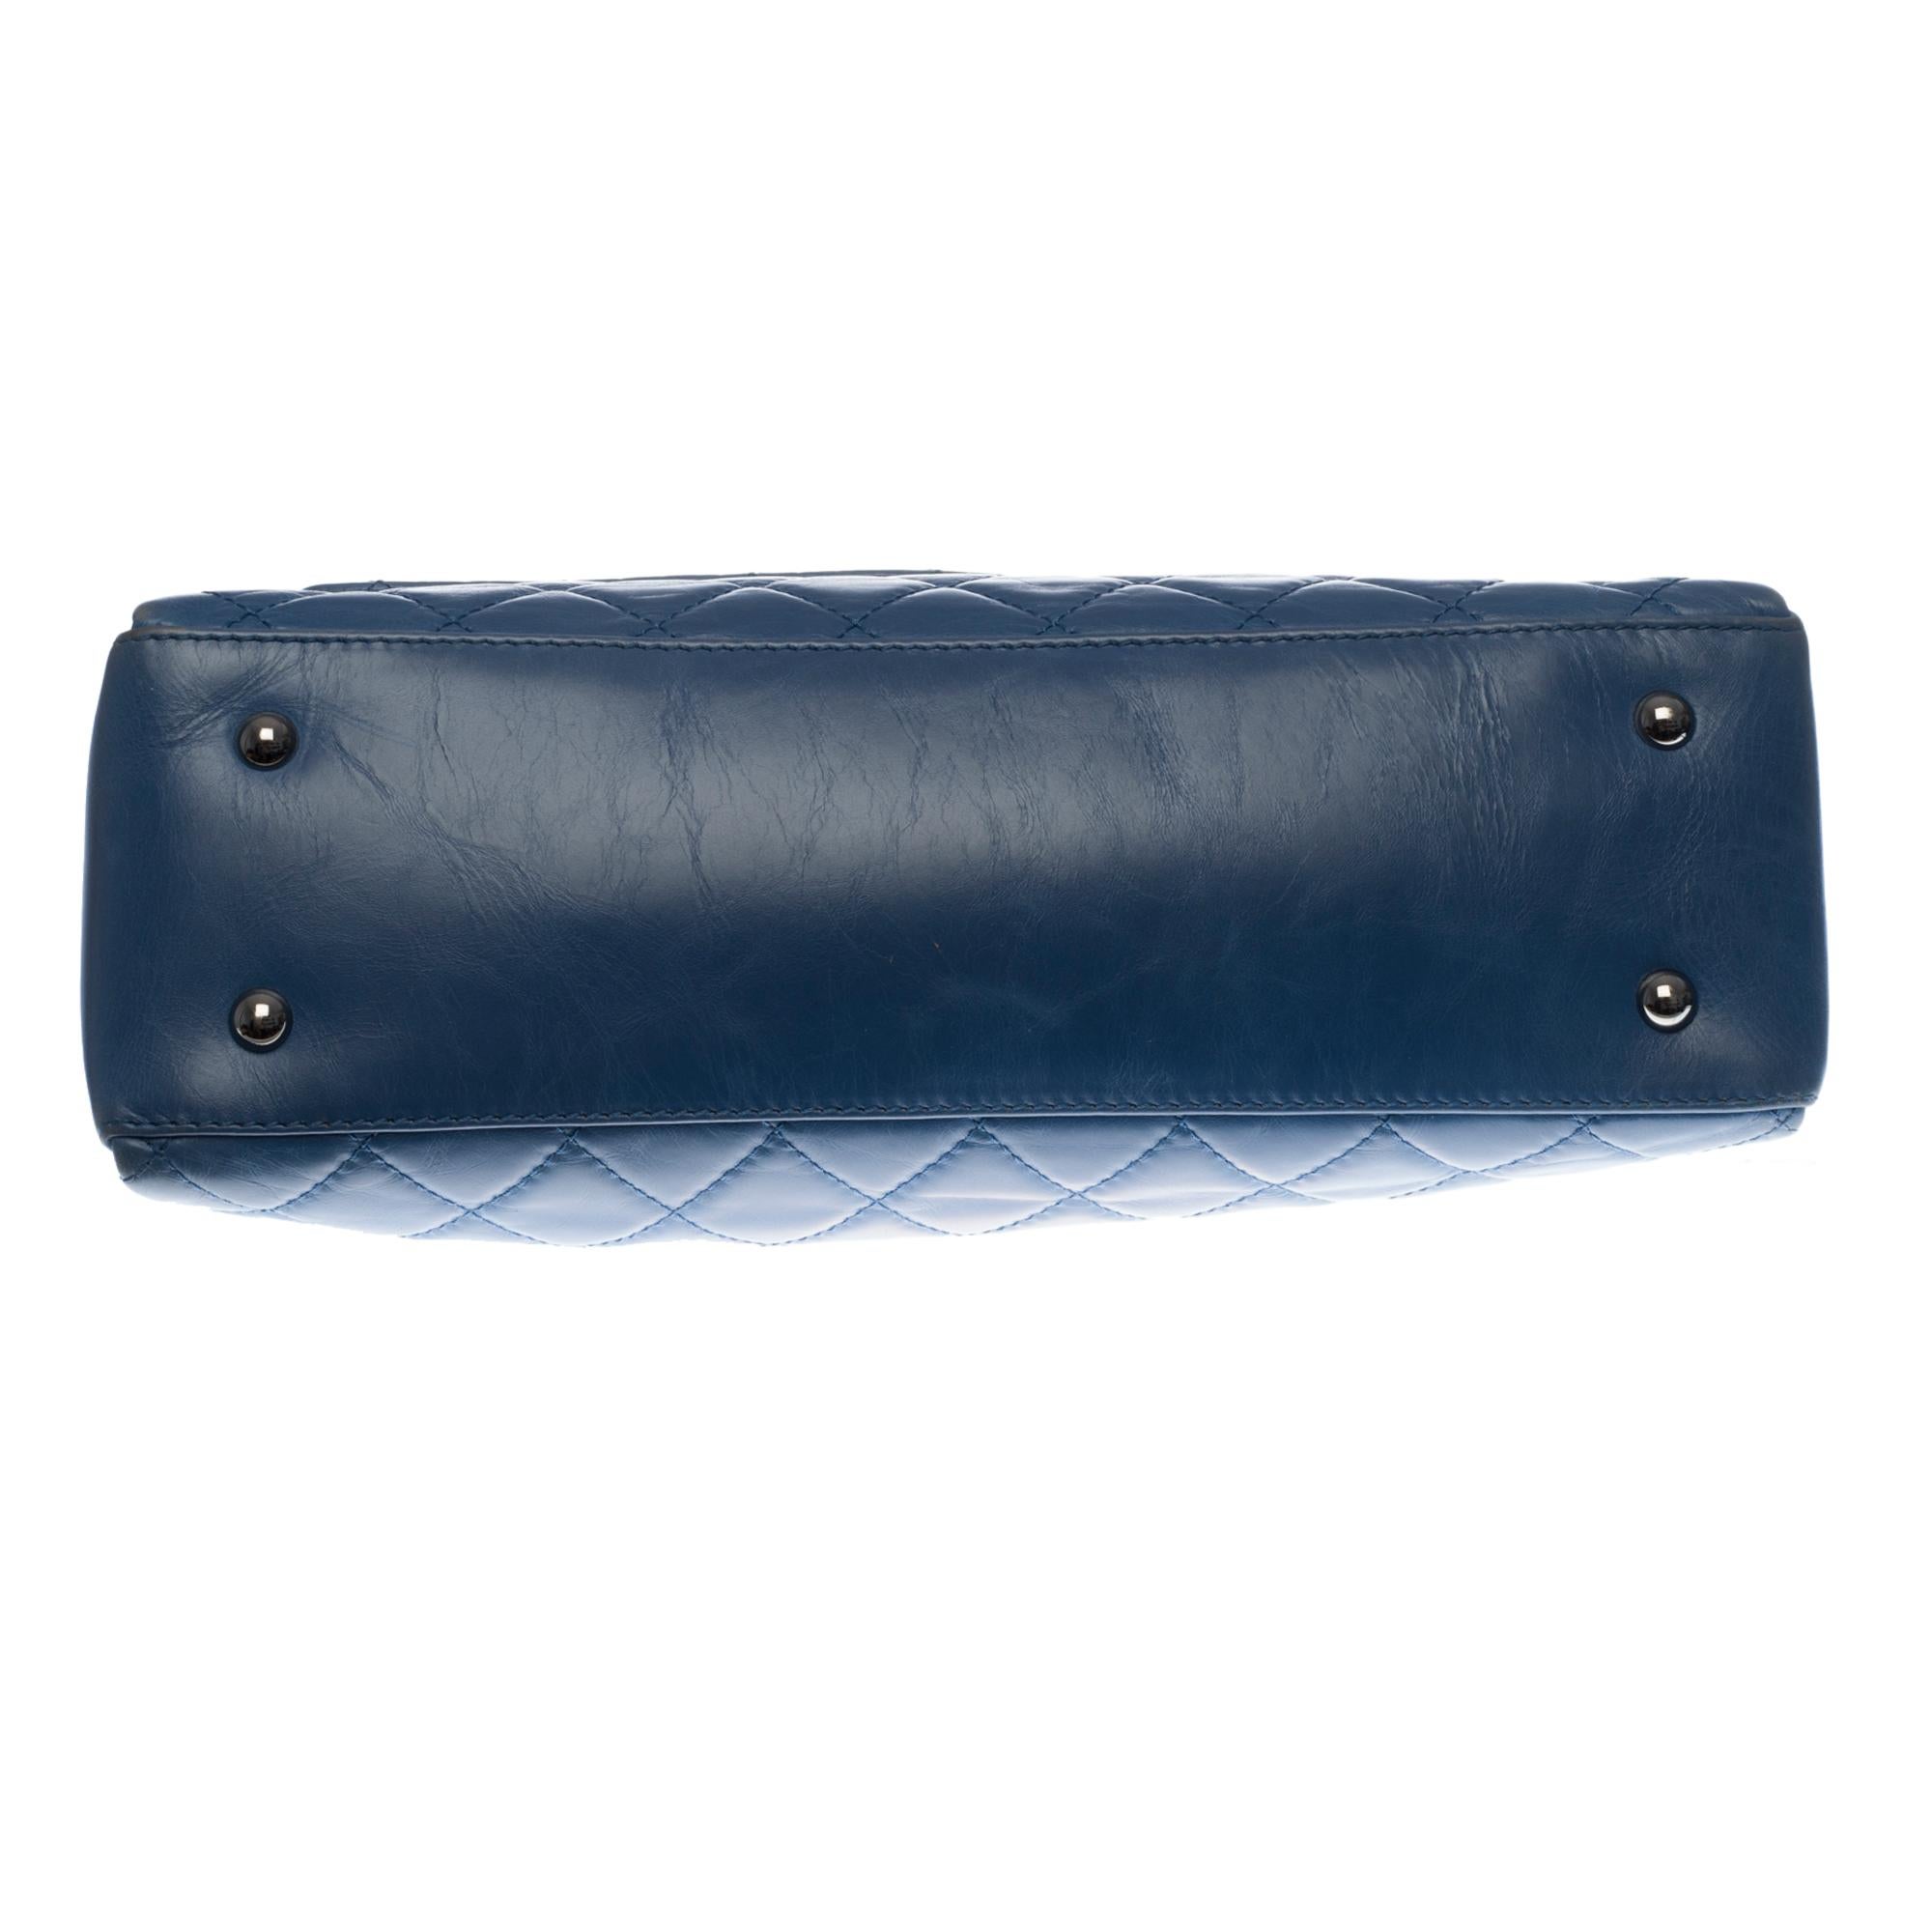 Chanel Classic Maxi Flap shoulder bag in blue quilted lambskin, SHW 1